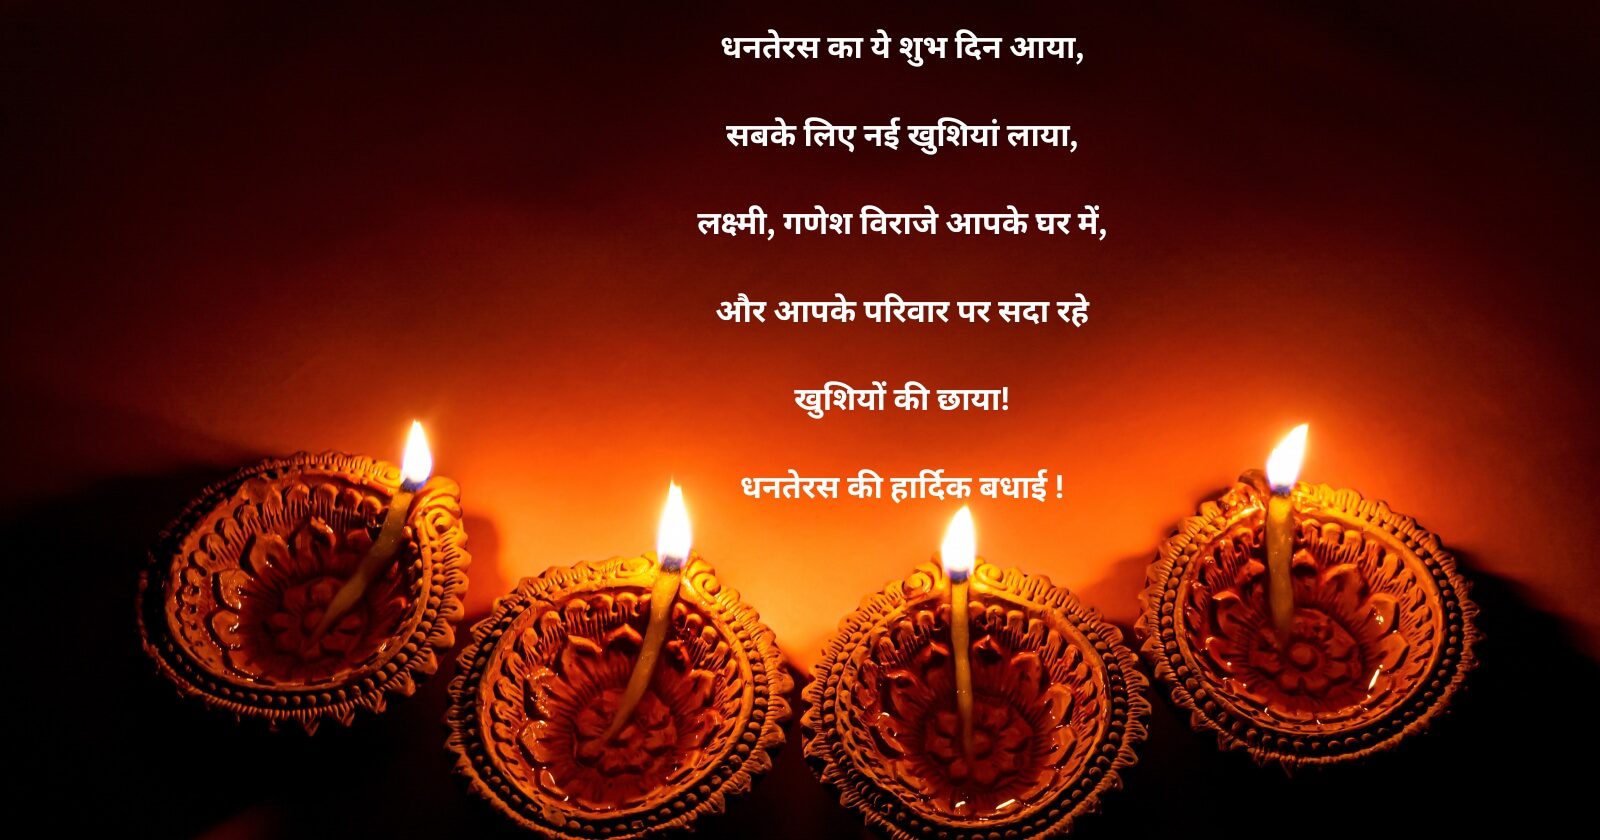 Dhanteras images for whatsapp